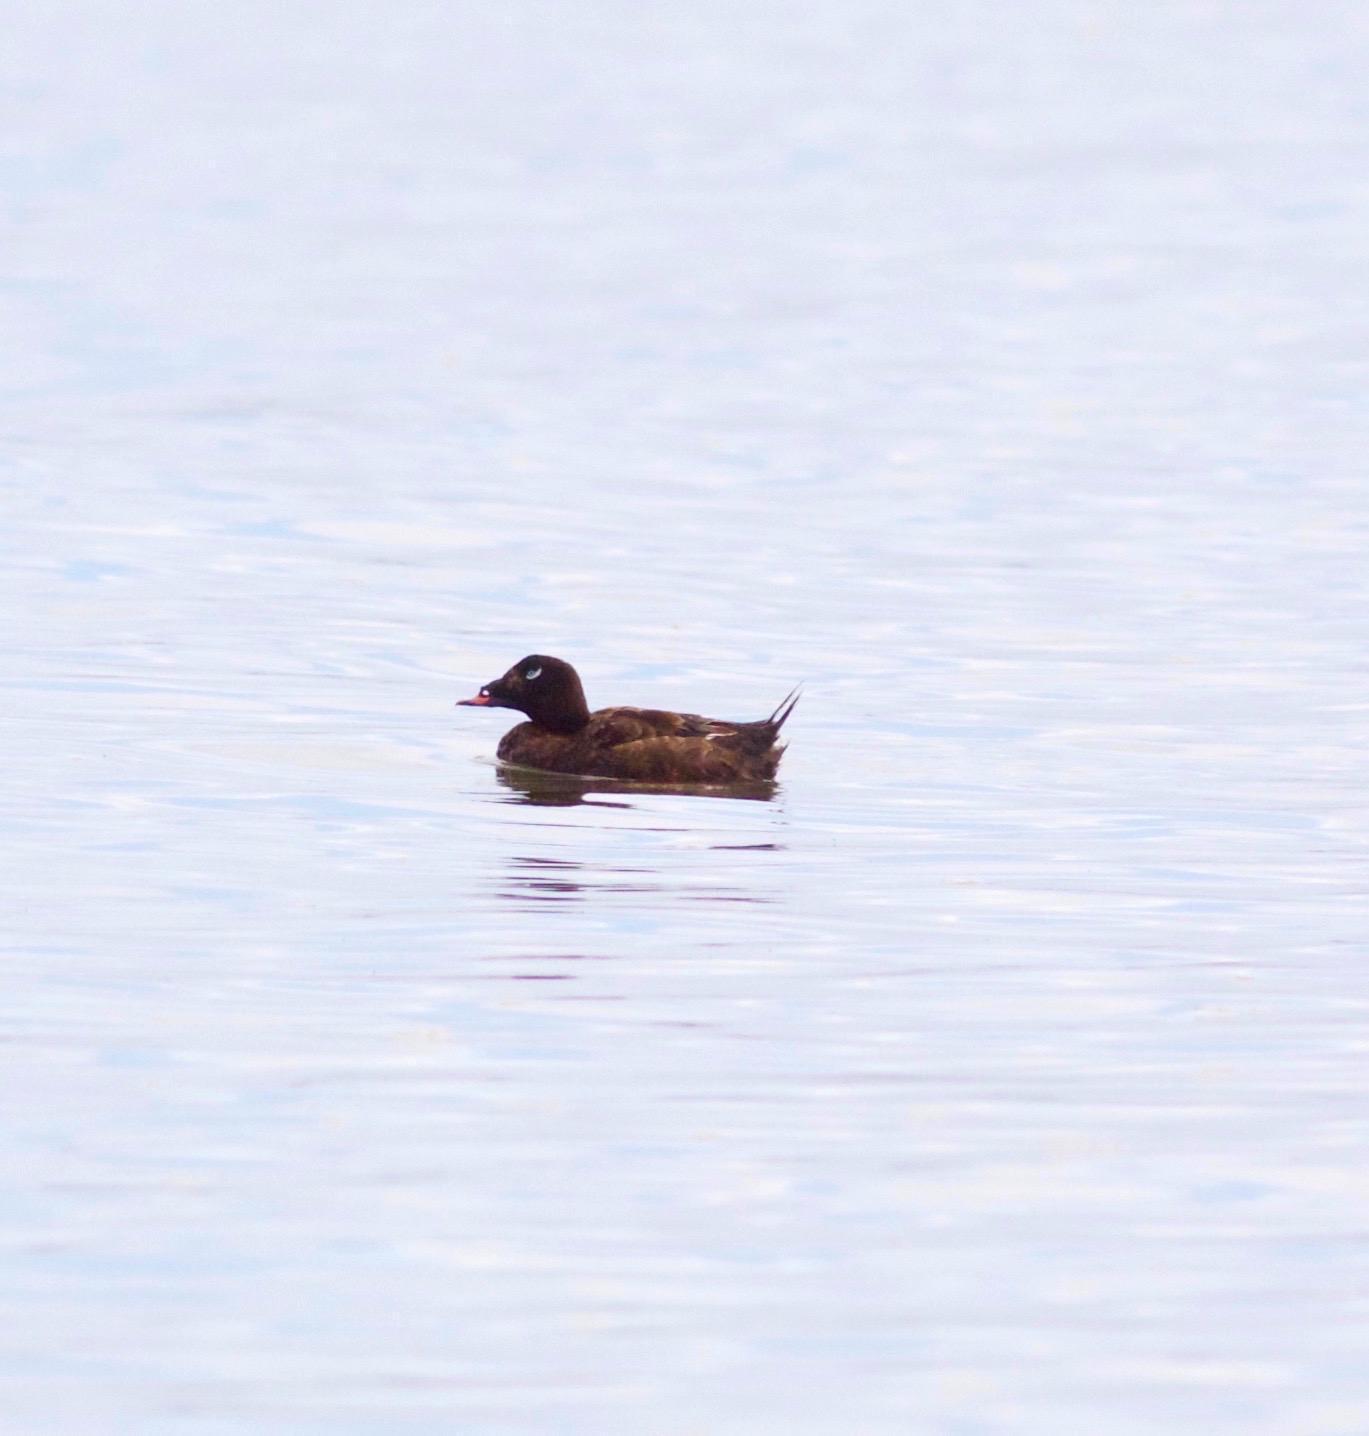 White-winged/Stejneger's Scoter Photo by Kathryn Keith